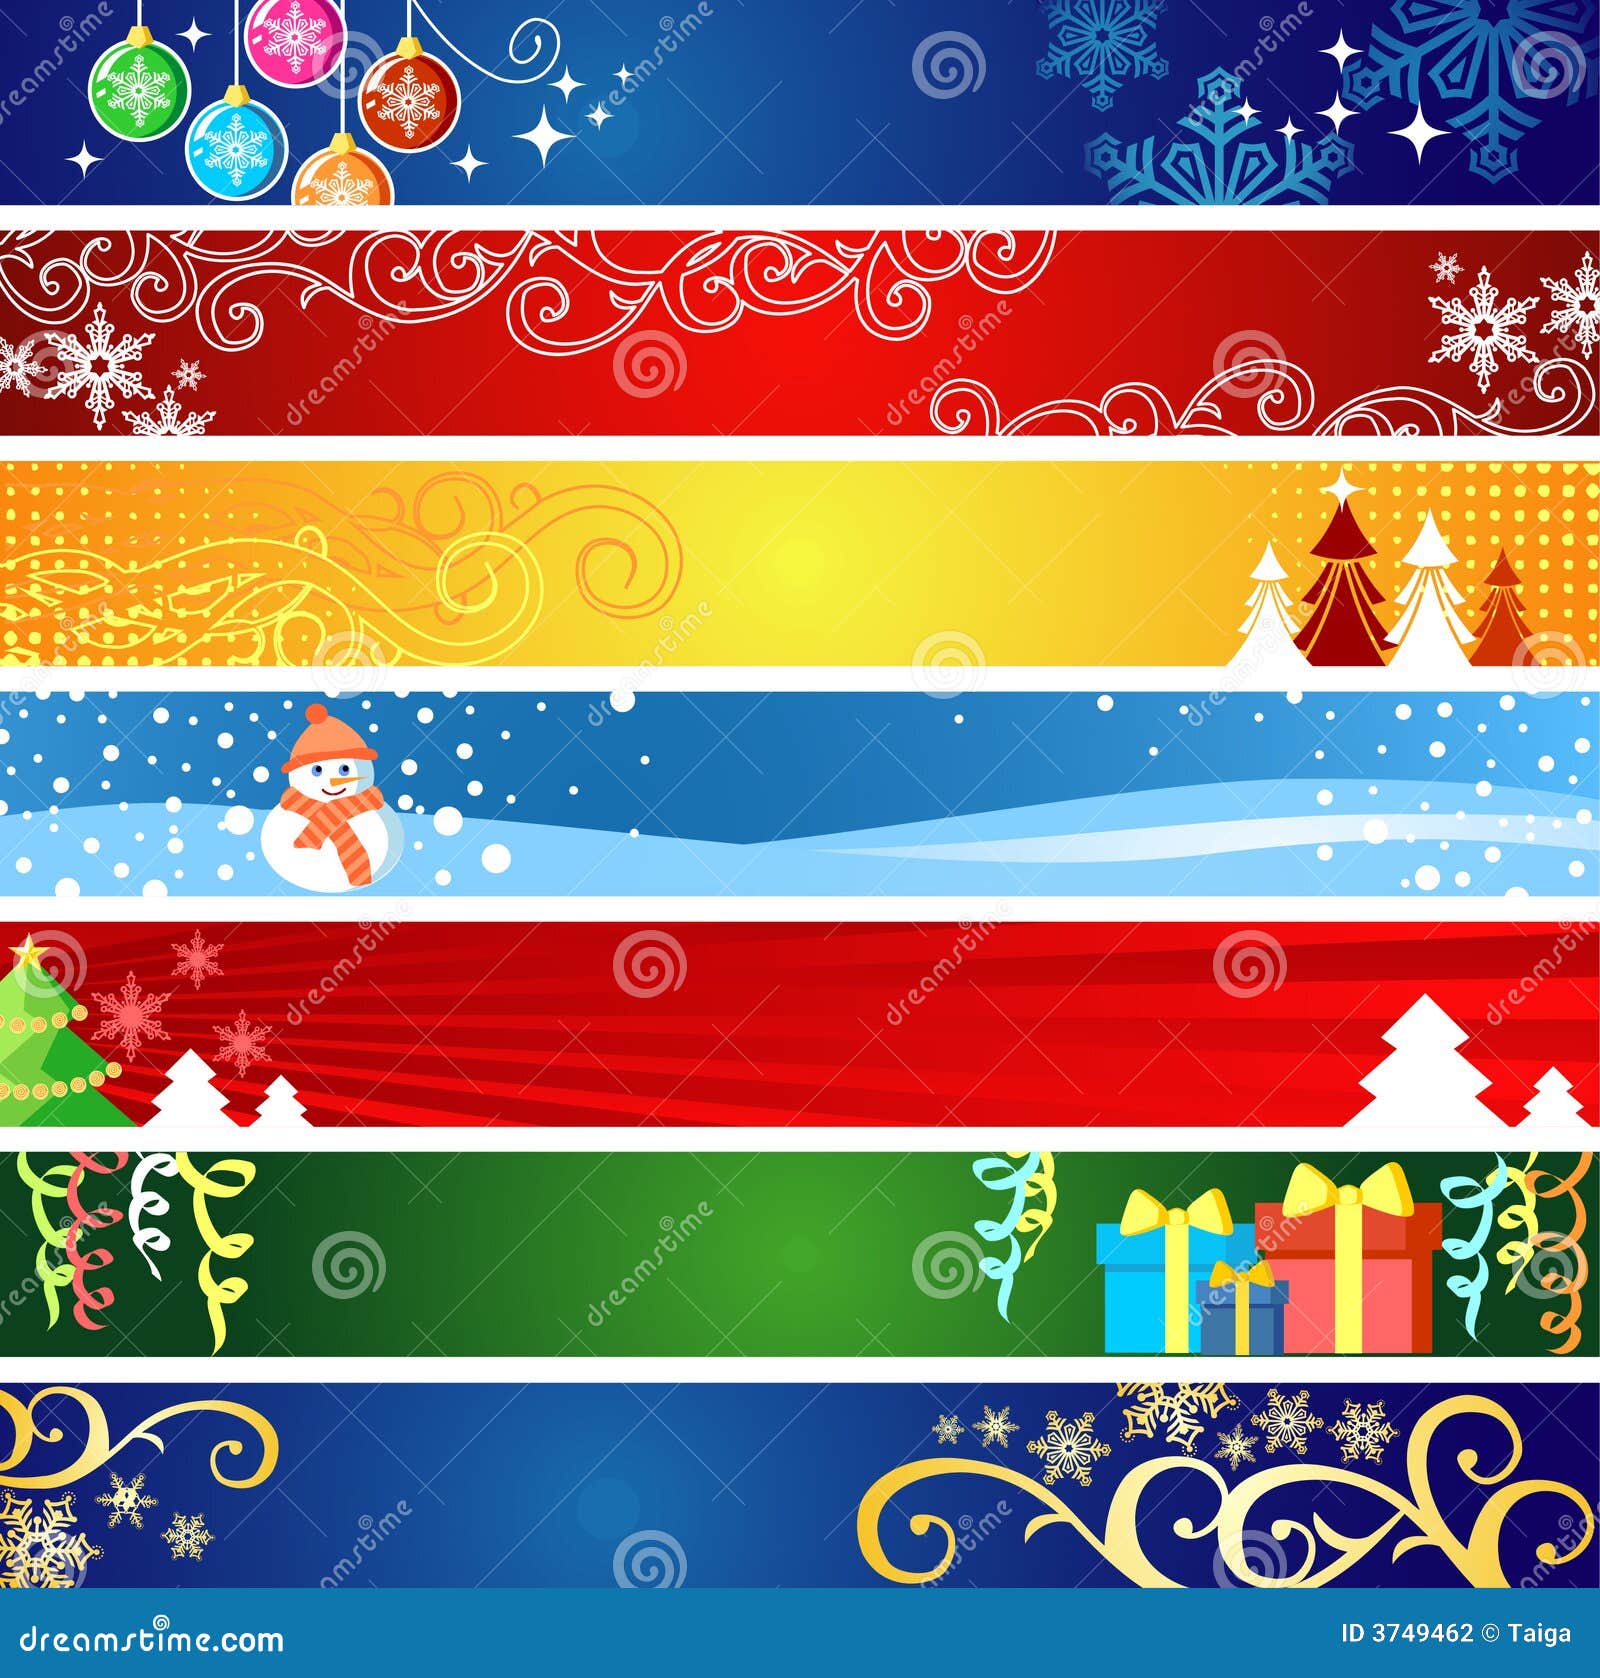 Christmas Banners with Space for Your Text Stock Vector - Illustration ...